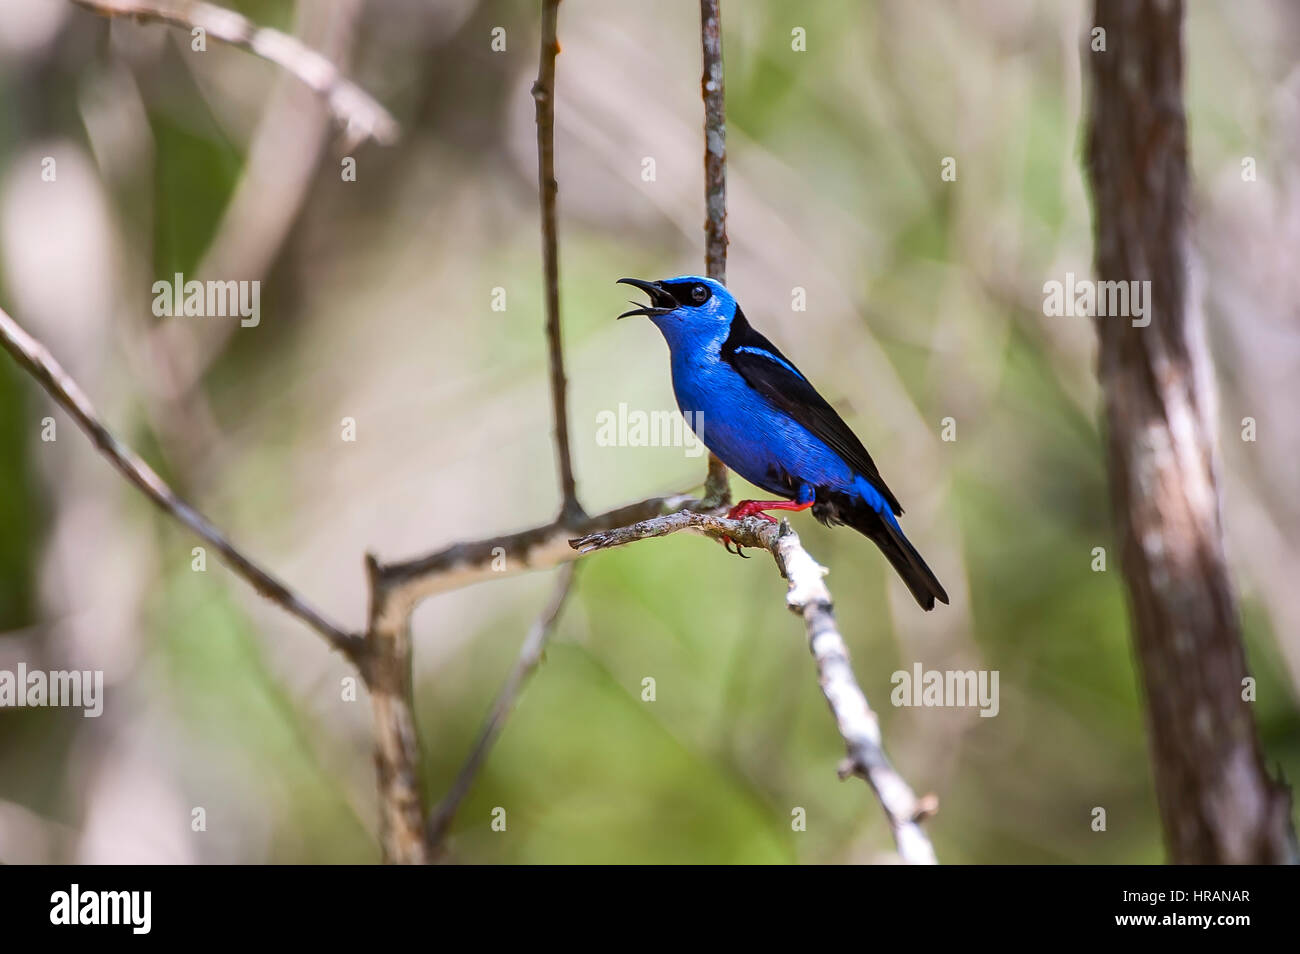 Blue Dacnis (Dacnis cayana), photographed in Domingos Martins, Espírito Santo - Southeast of Brazil. Atlantic Forest Biome. Stock Photo